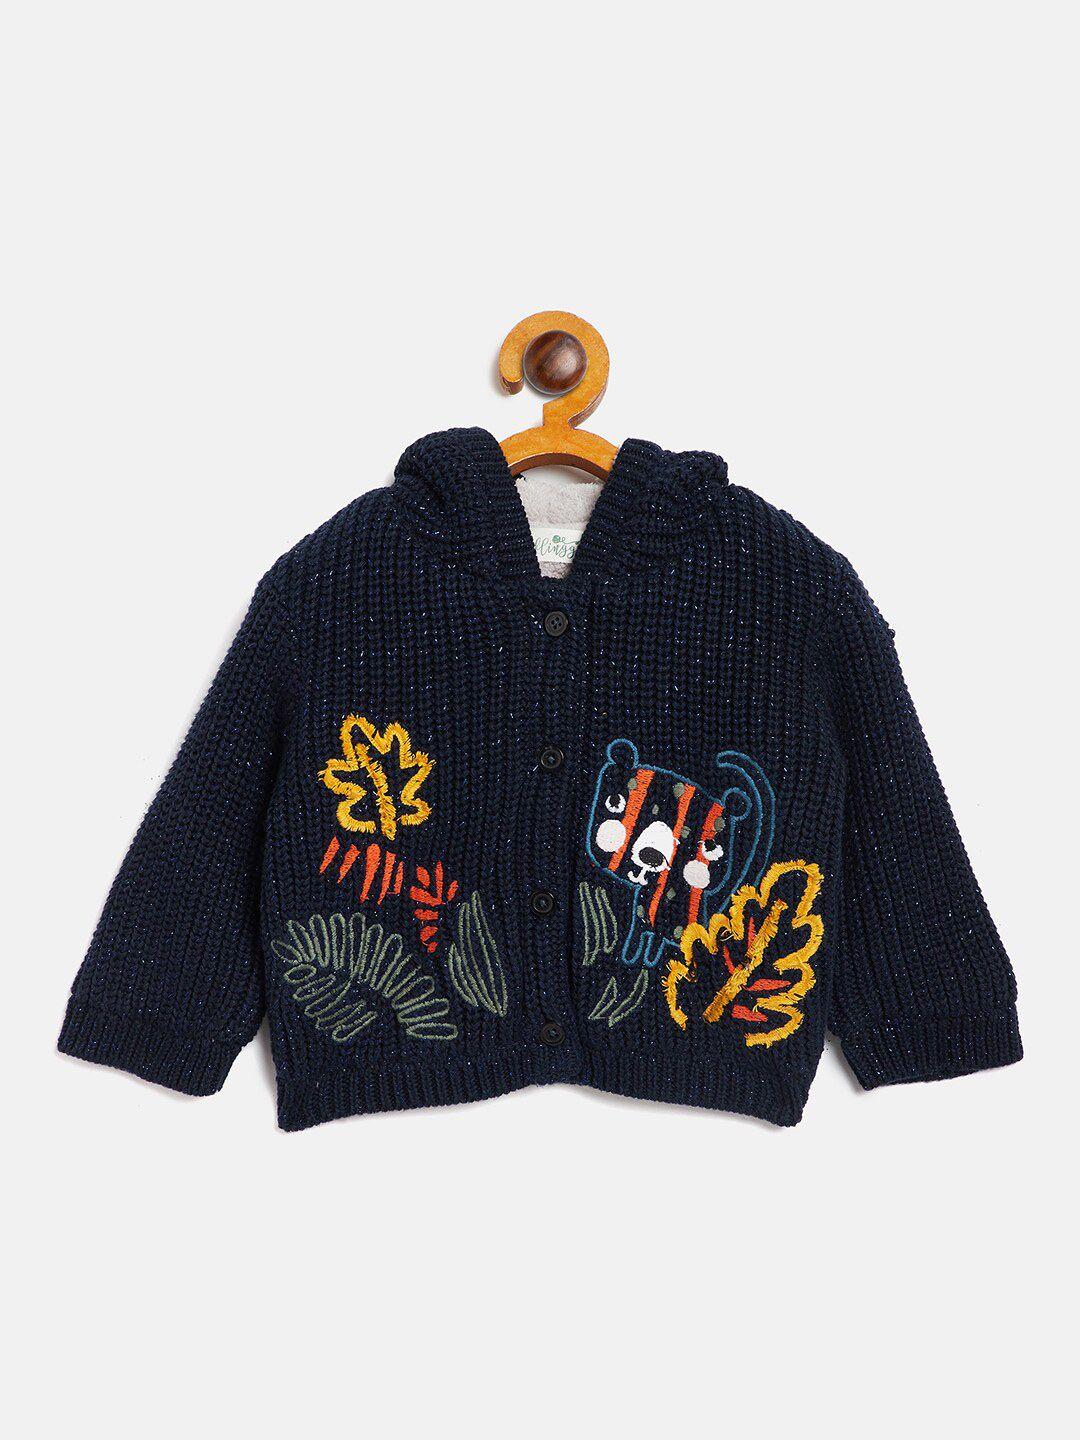 jwaaq kids navy blue & yellow embroidered hooded pure cotton front-open sweater